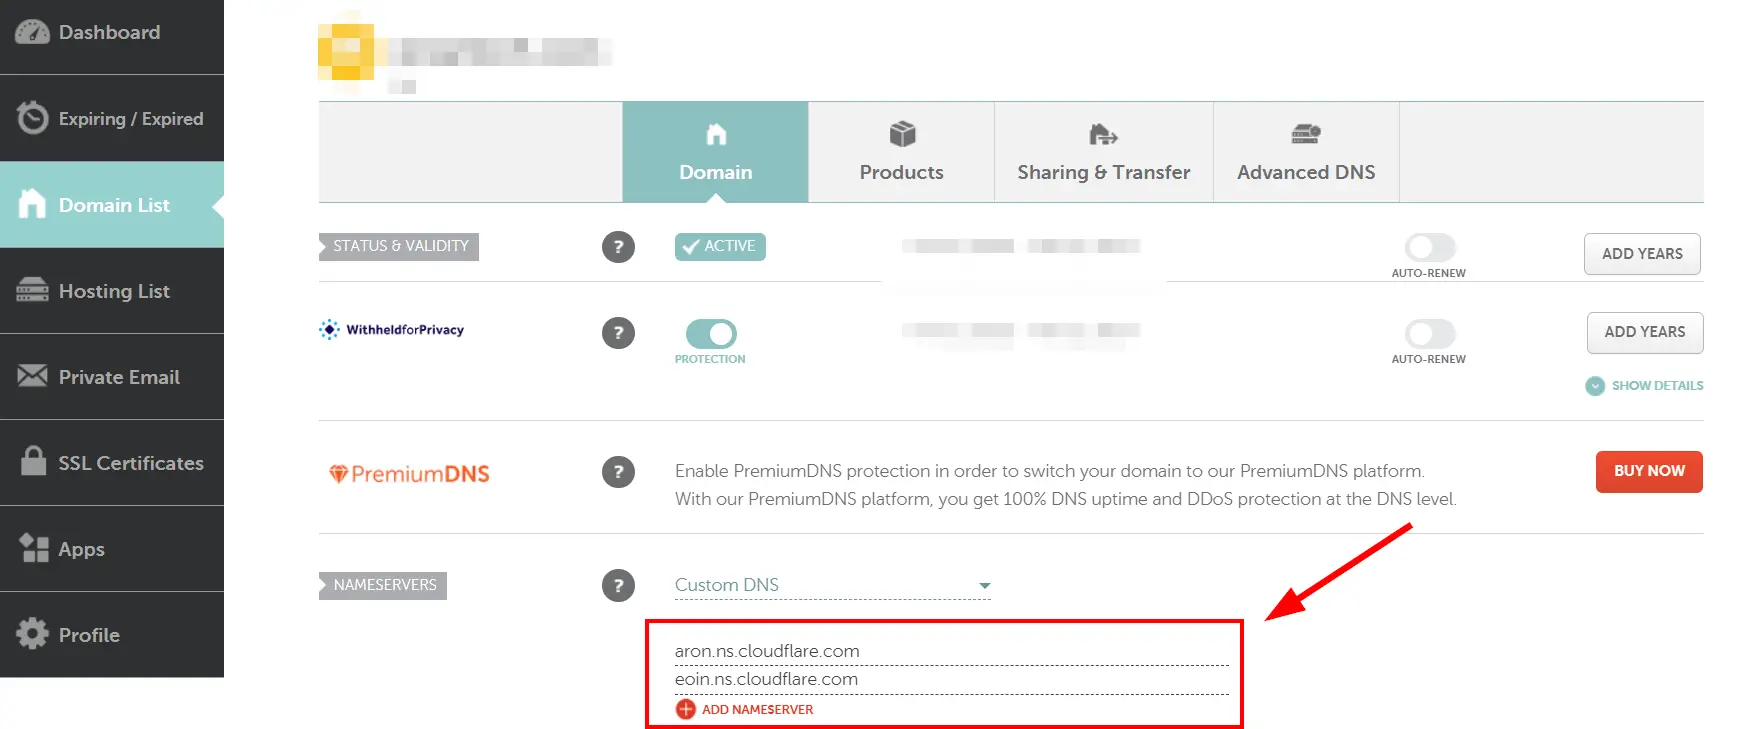 How to Transfer Domain from One Cloudflare Account to Another Account?